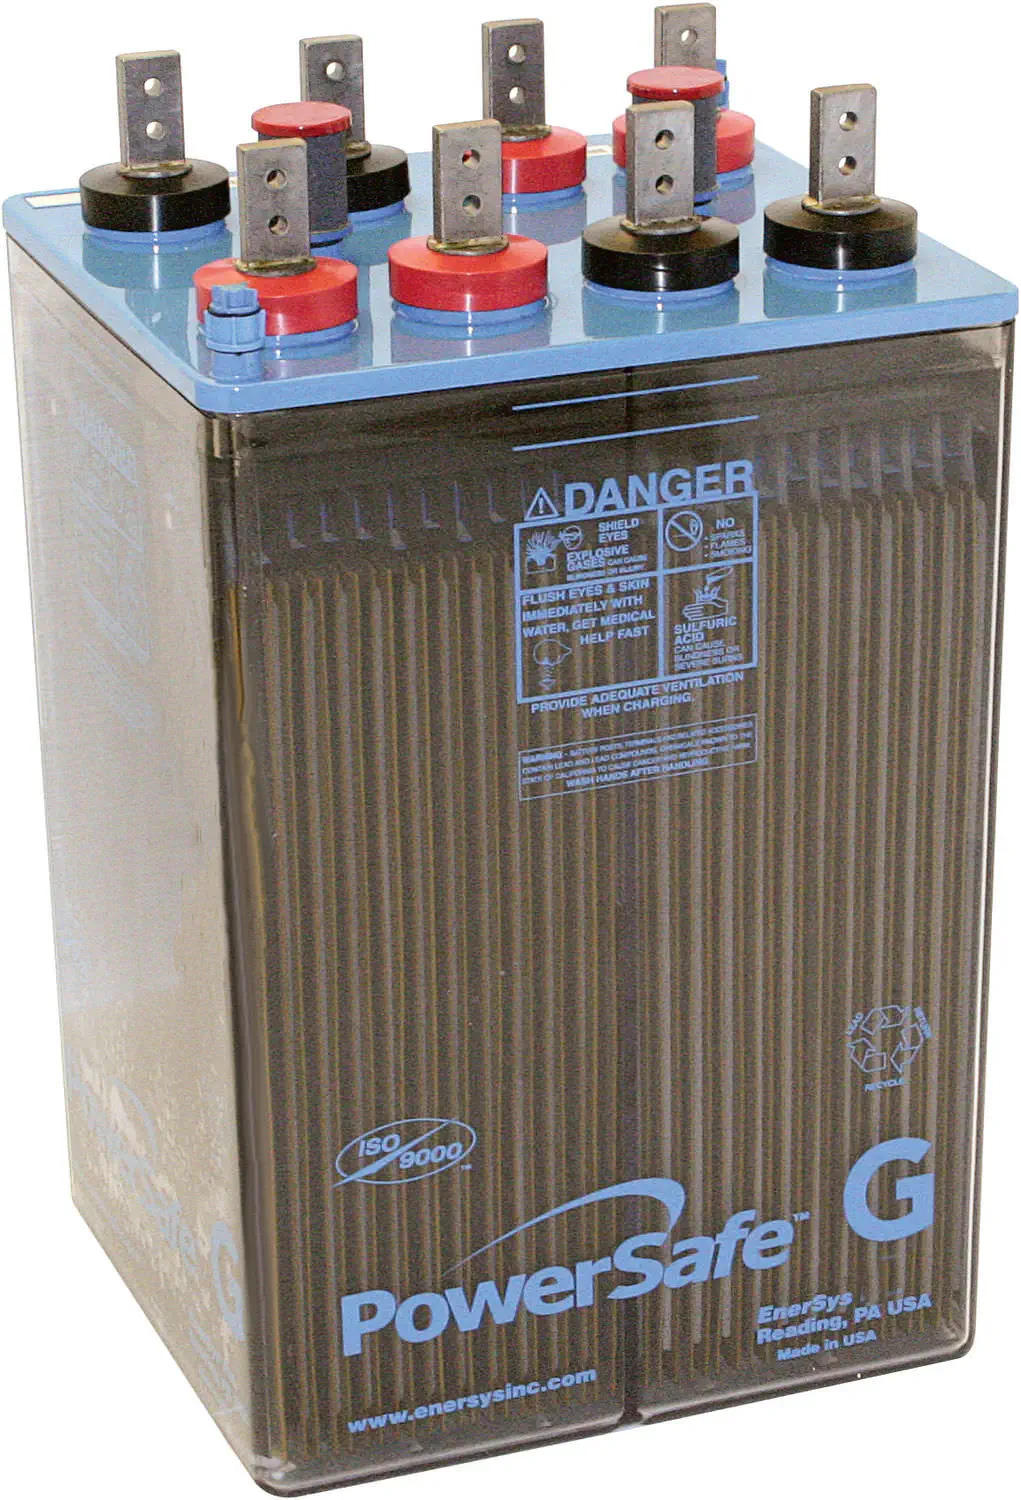 EnerSys PowerSafe GN-35